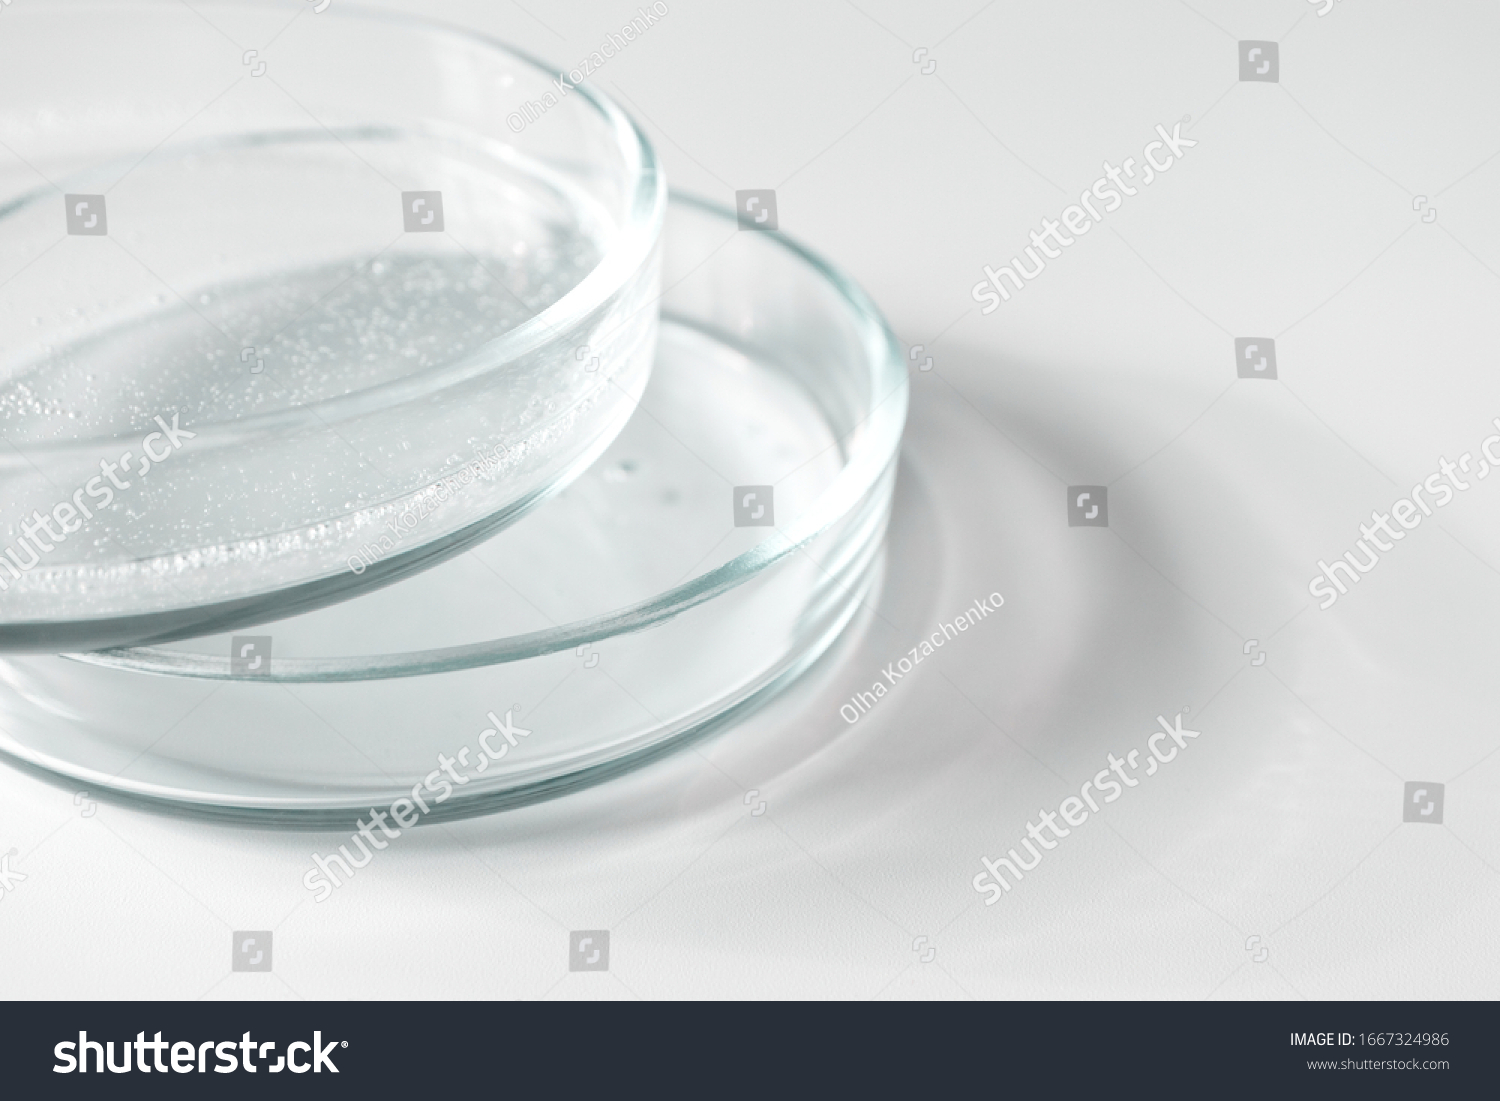 Close-up transparent gel in glass petri dish on white background with copy space and selective focus #1667324986